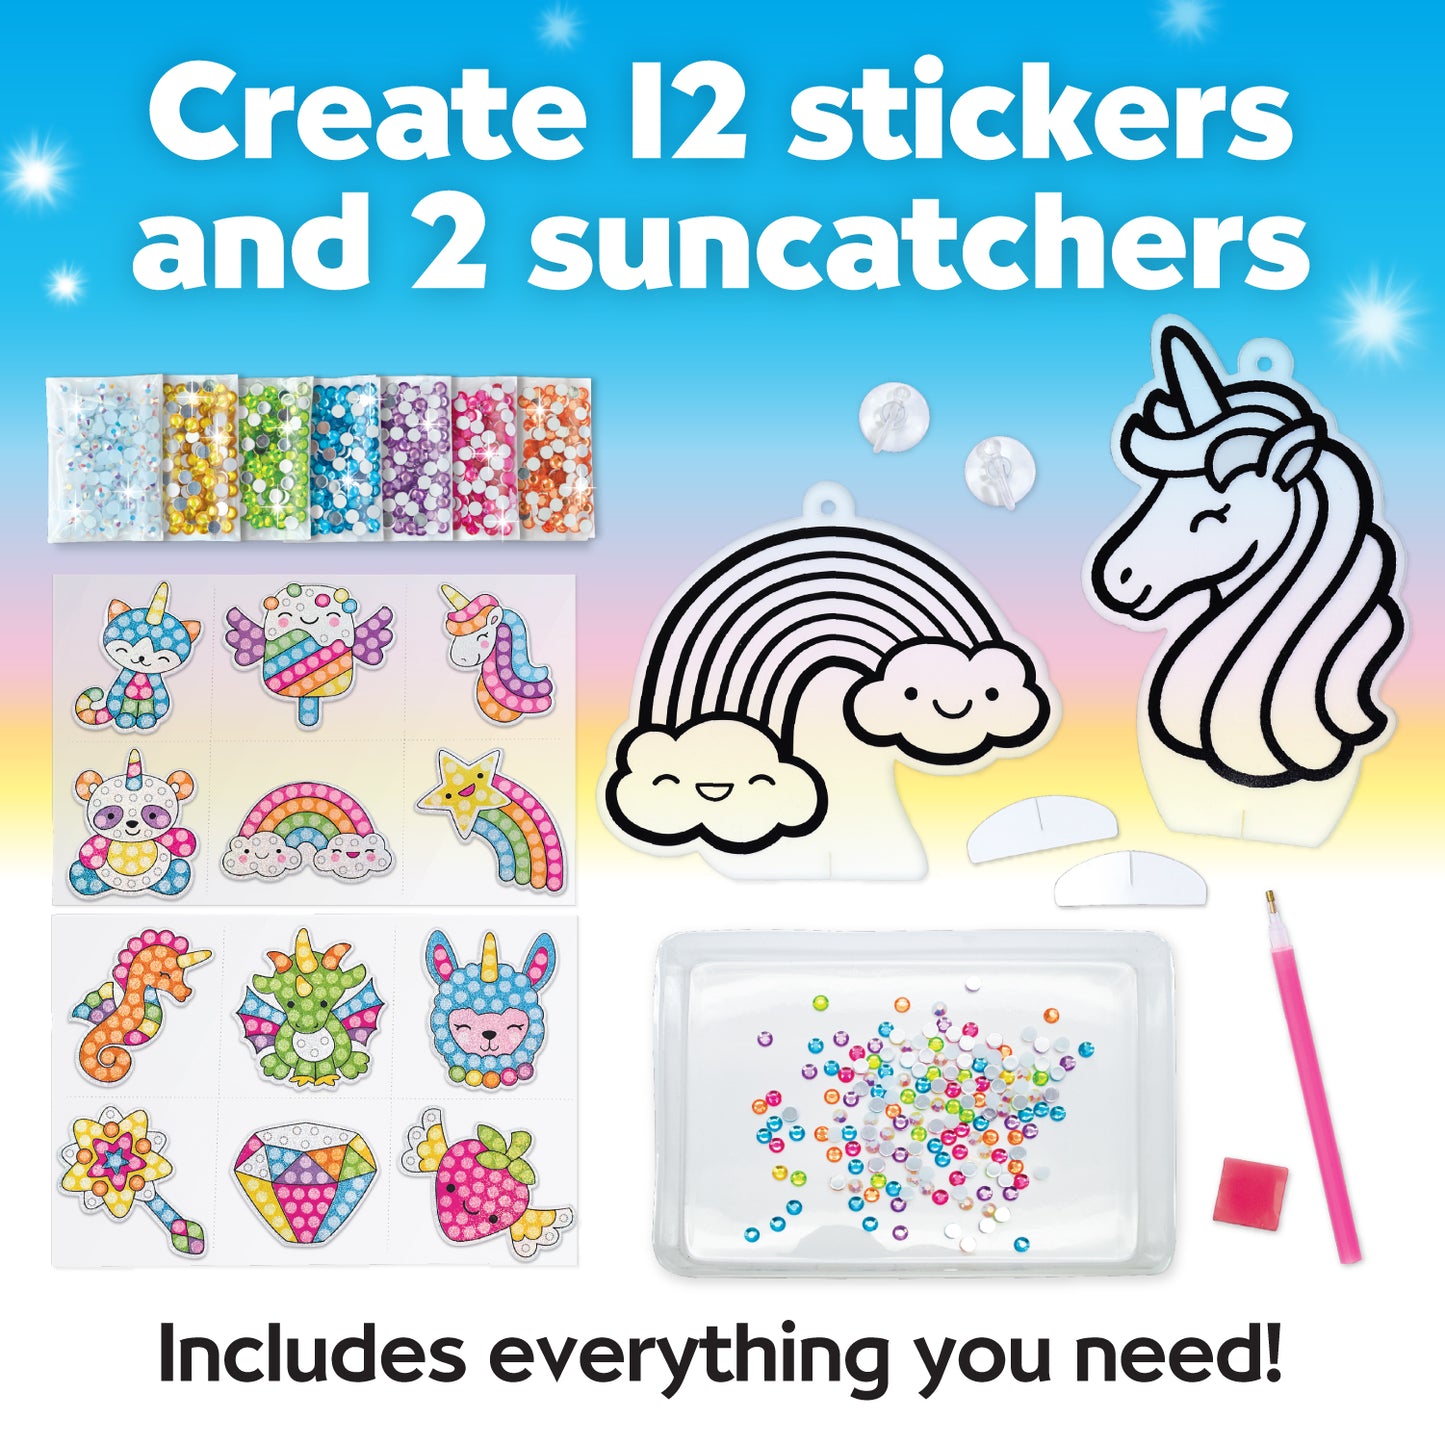 Create 12 stickers and 2 suncatchers using this diamond painting kit from faber castell, includes everything needed!